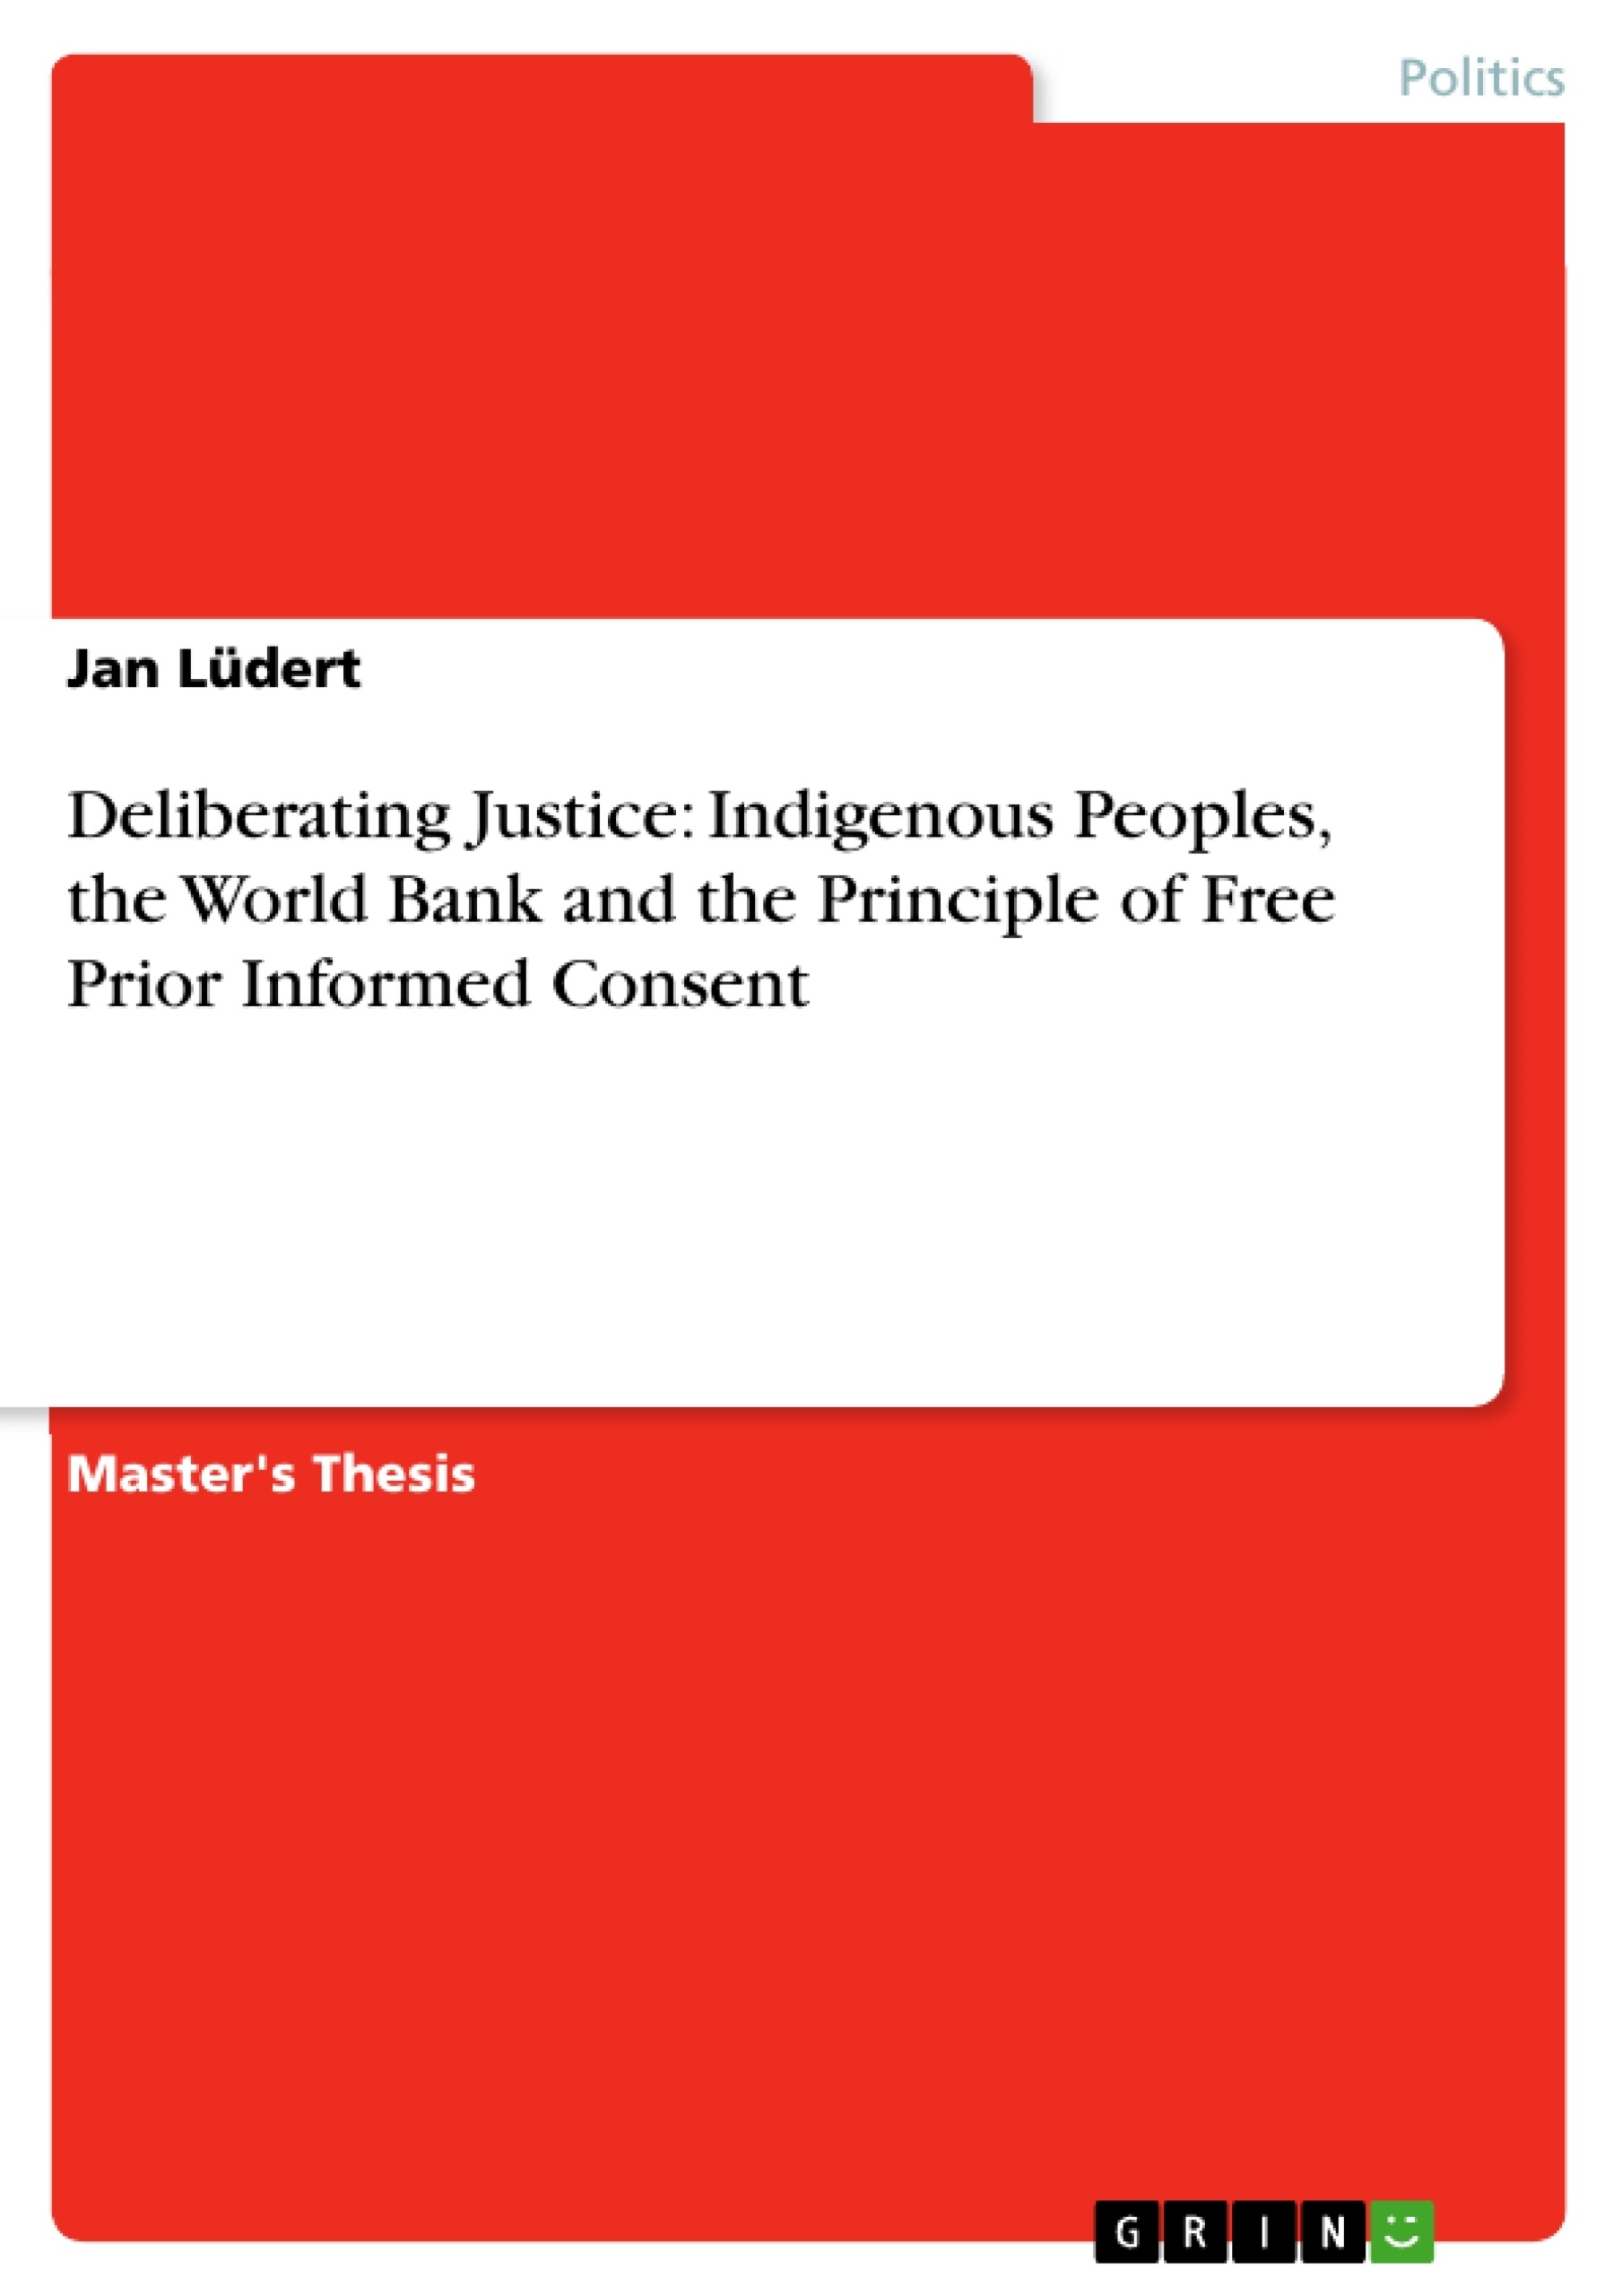 Titre: Deliberating Justice: Indigenous Peoples, the World Bank and the Principle of Free Prior Informed Consent